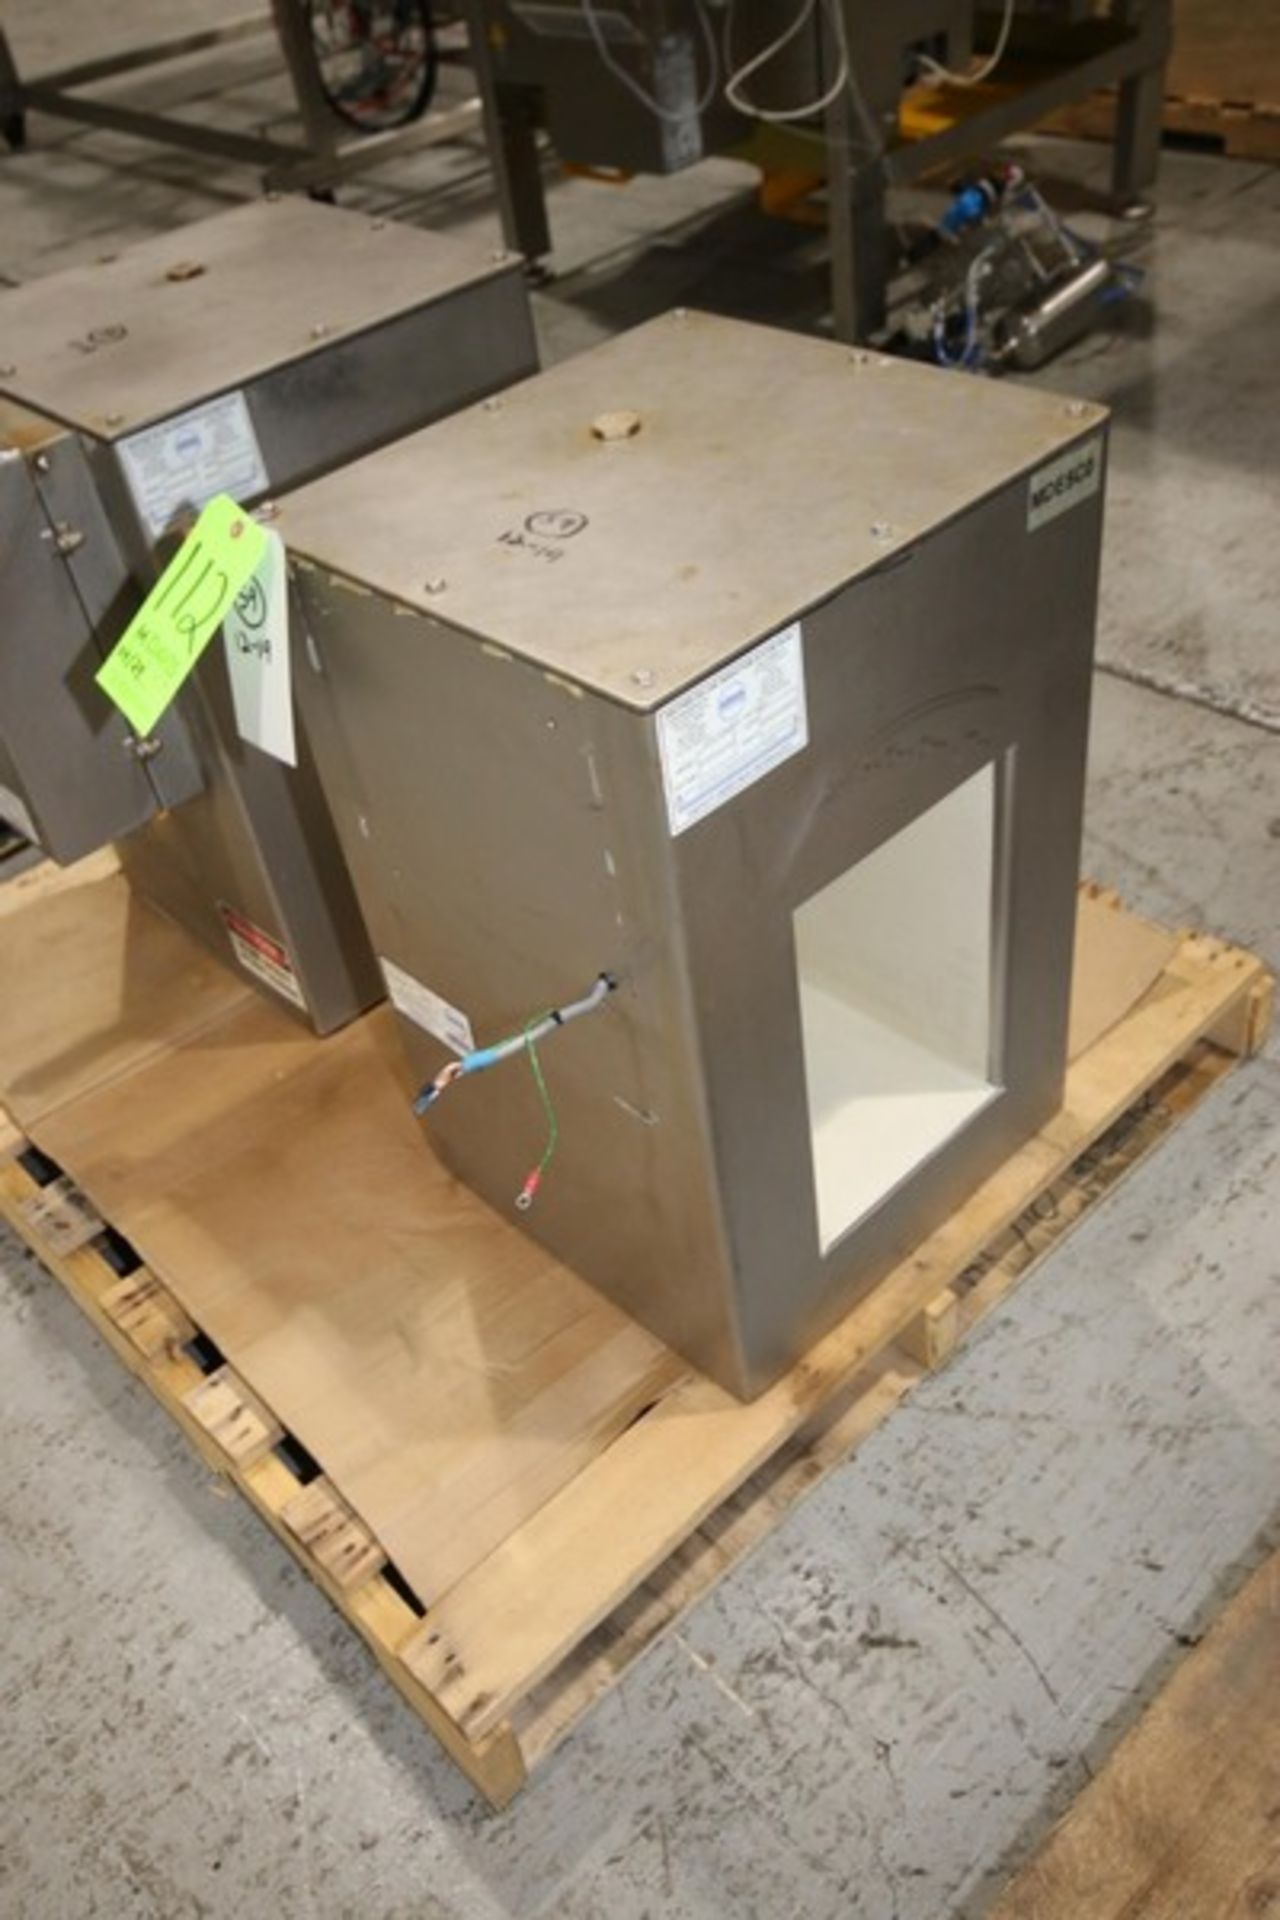 Loma IQ2 S/S Flo-Thru Metal Detector, S/N 38565B,with Aprox. 9" W x 16" D x 13-1/2" H Product - Image 2 of 3